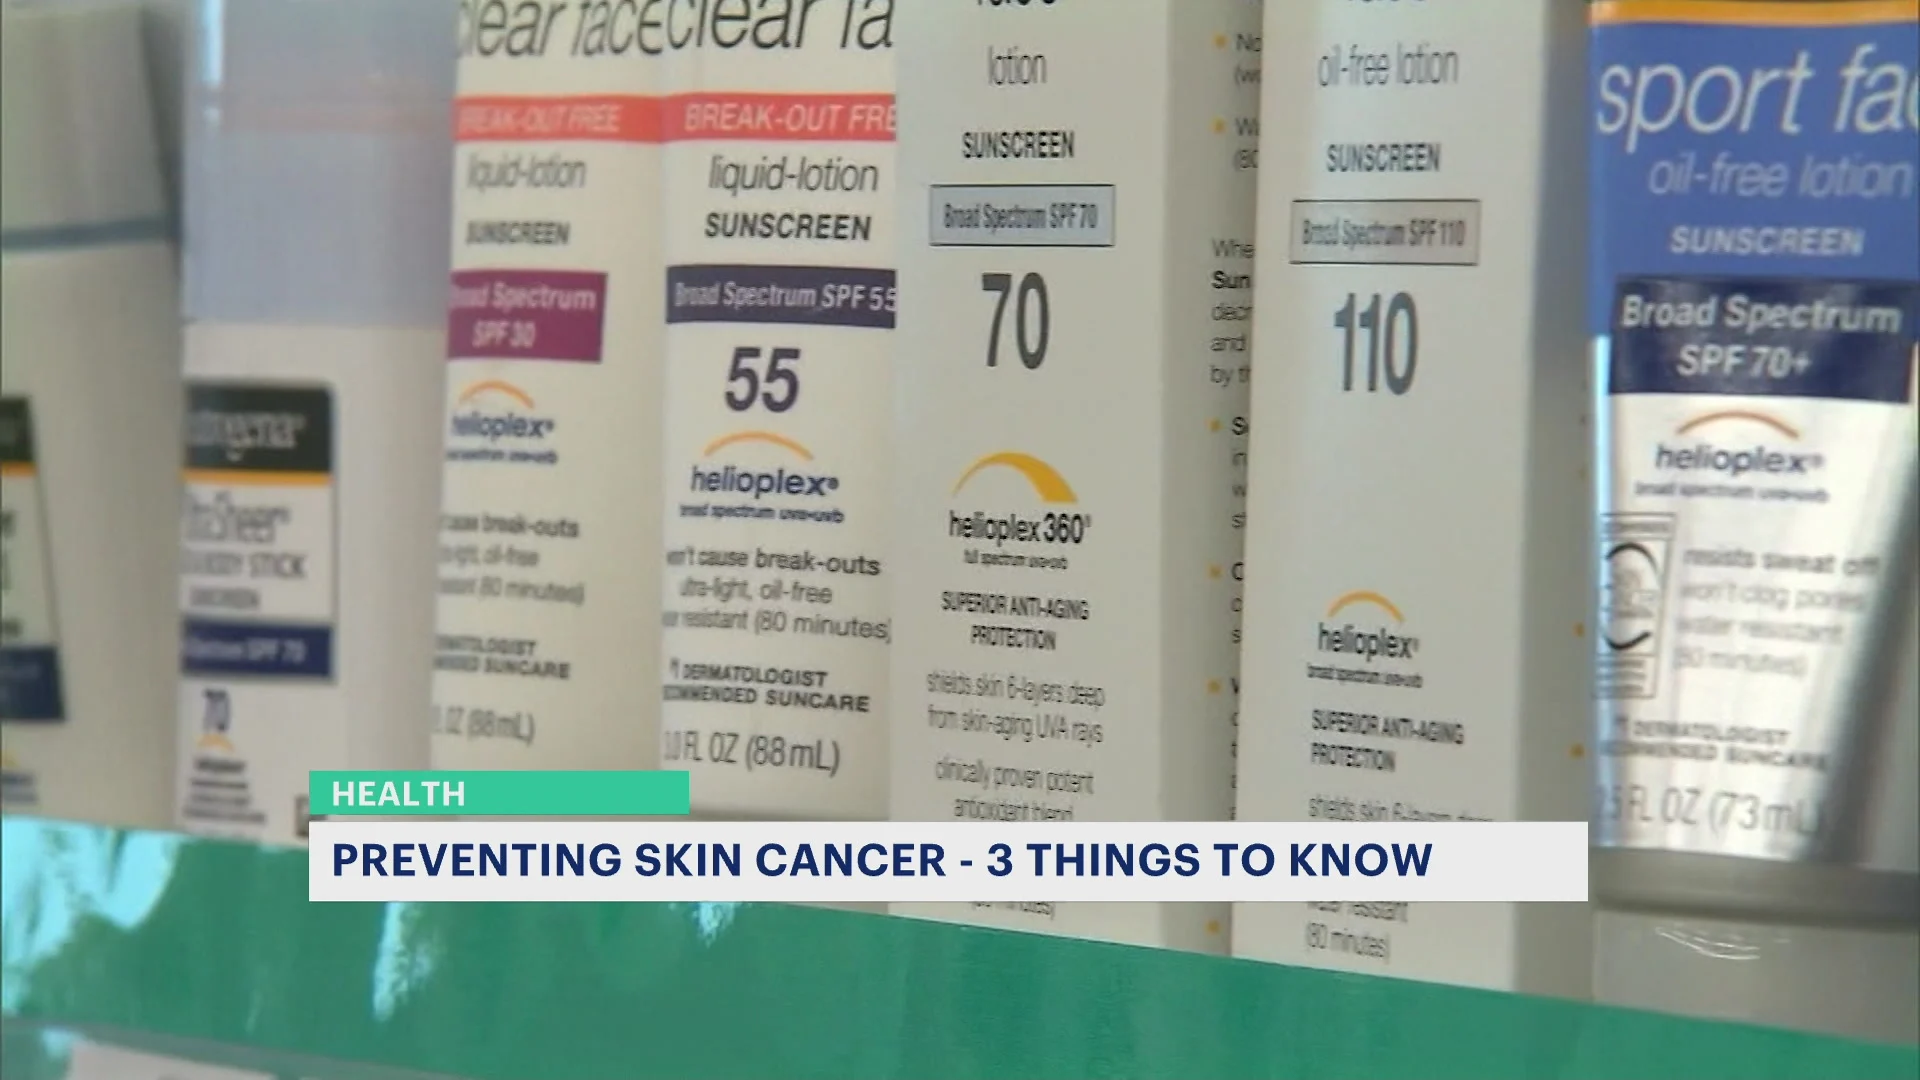 Preventing skin cancer: 3 tips for a safe summer in the sun